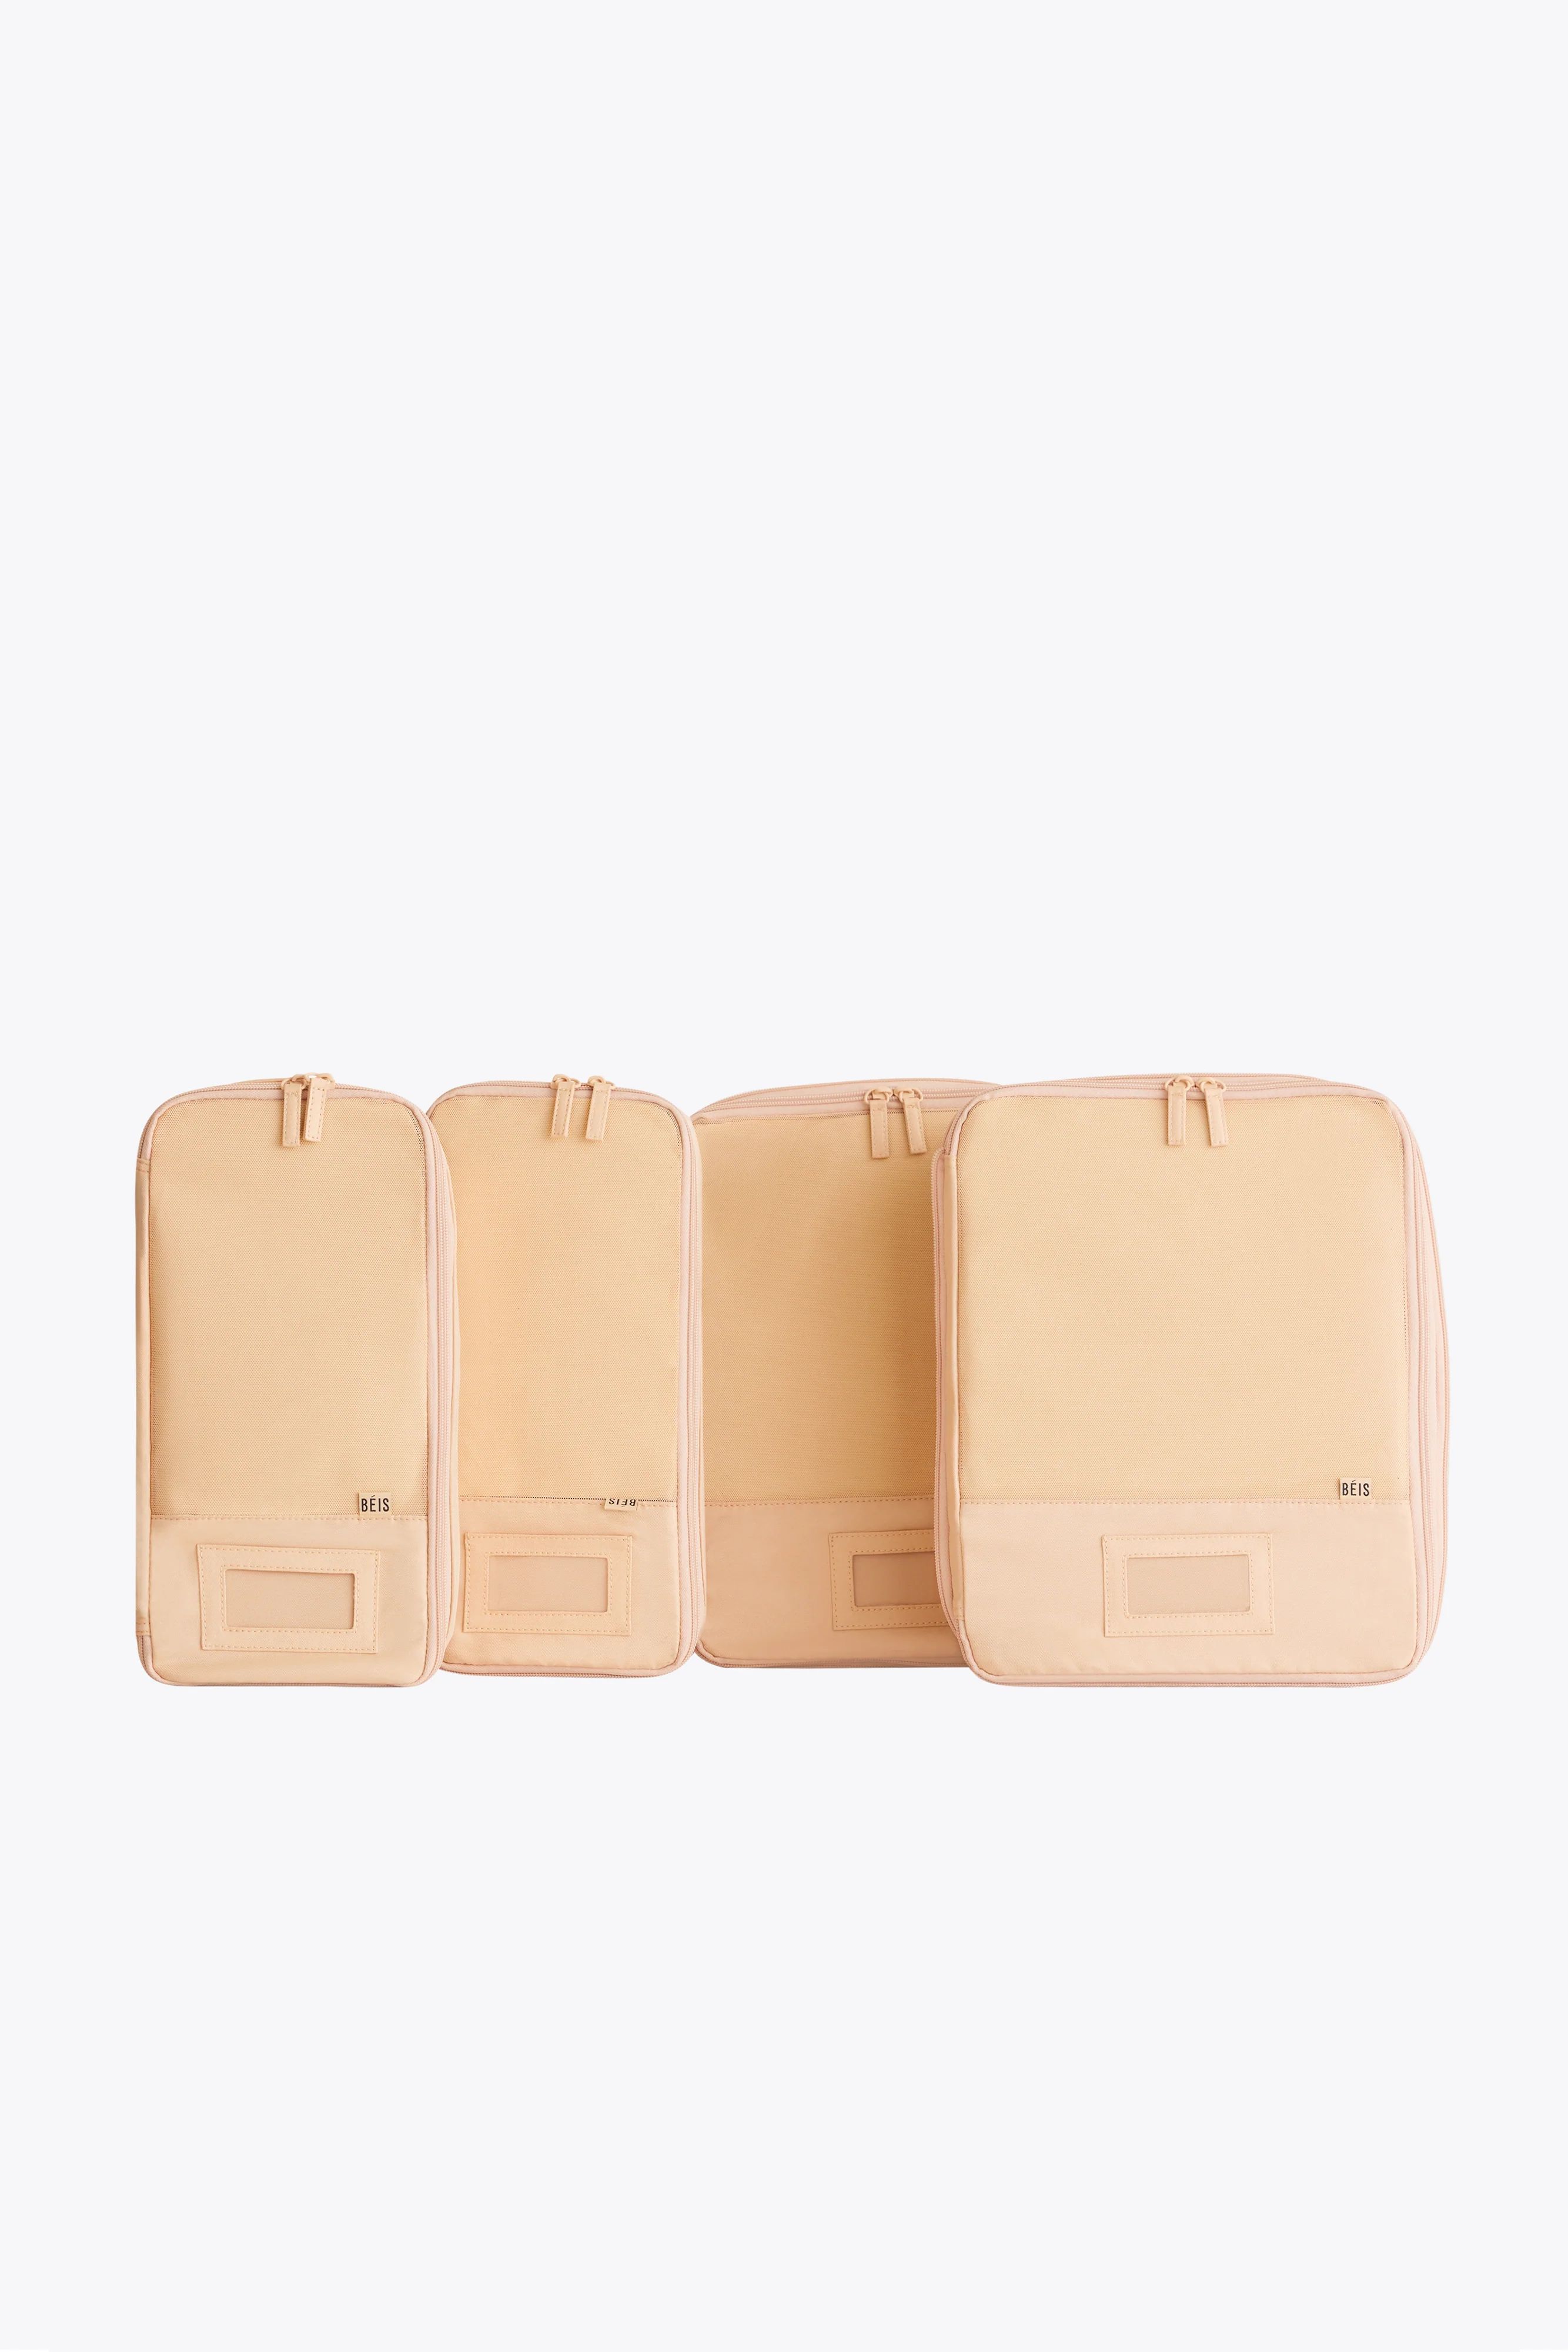 The Compression Packing Cubes 4 pc in Beige | BÉIS Travel